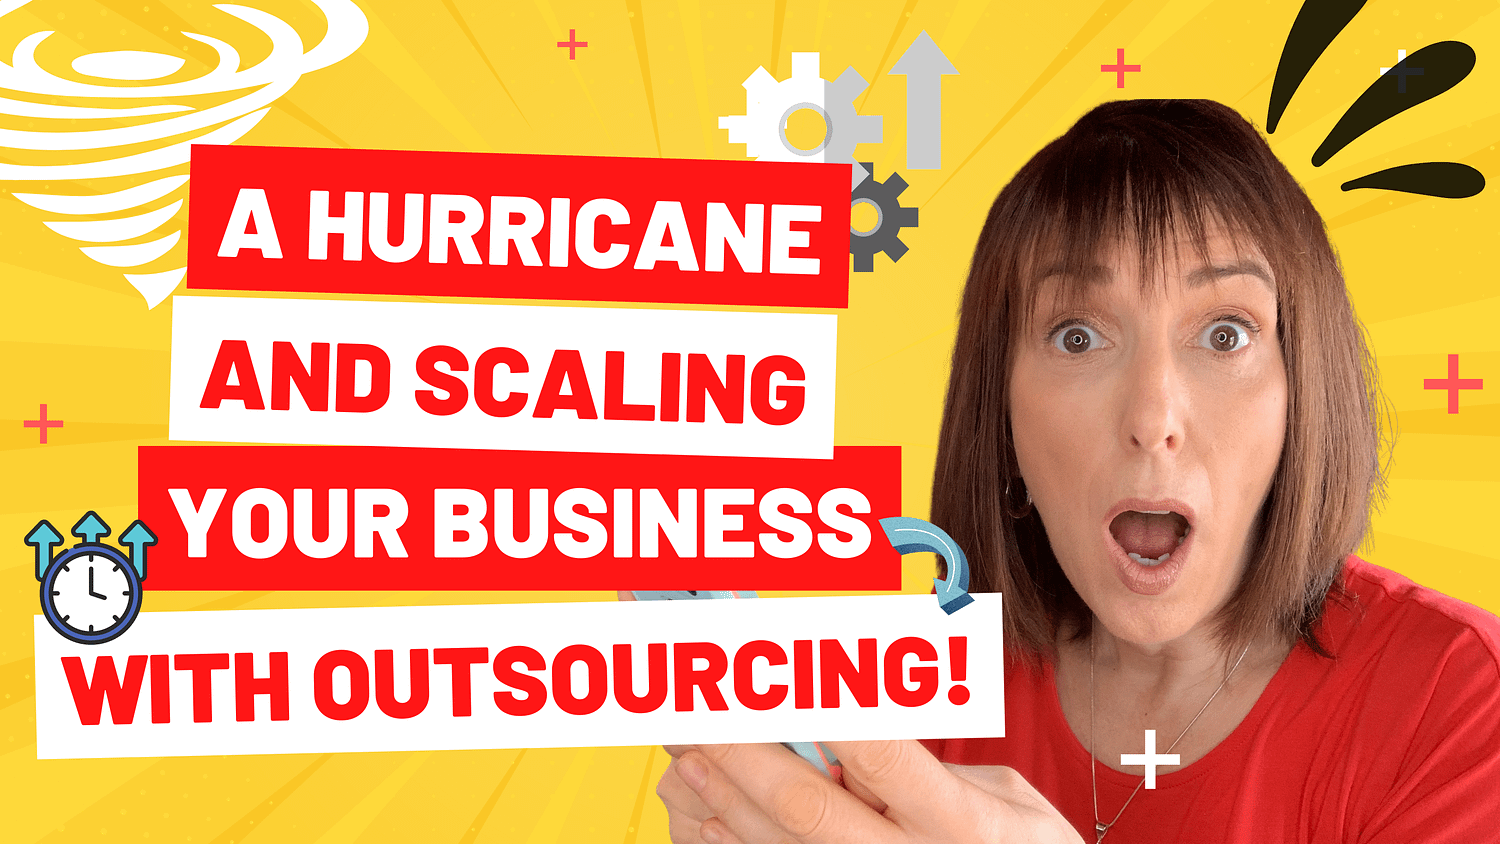 A Hurricane And Scaling Your Business With Outsourcing!